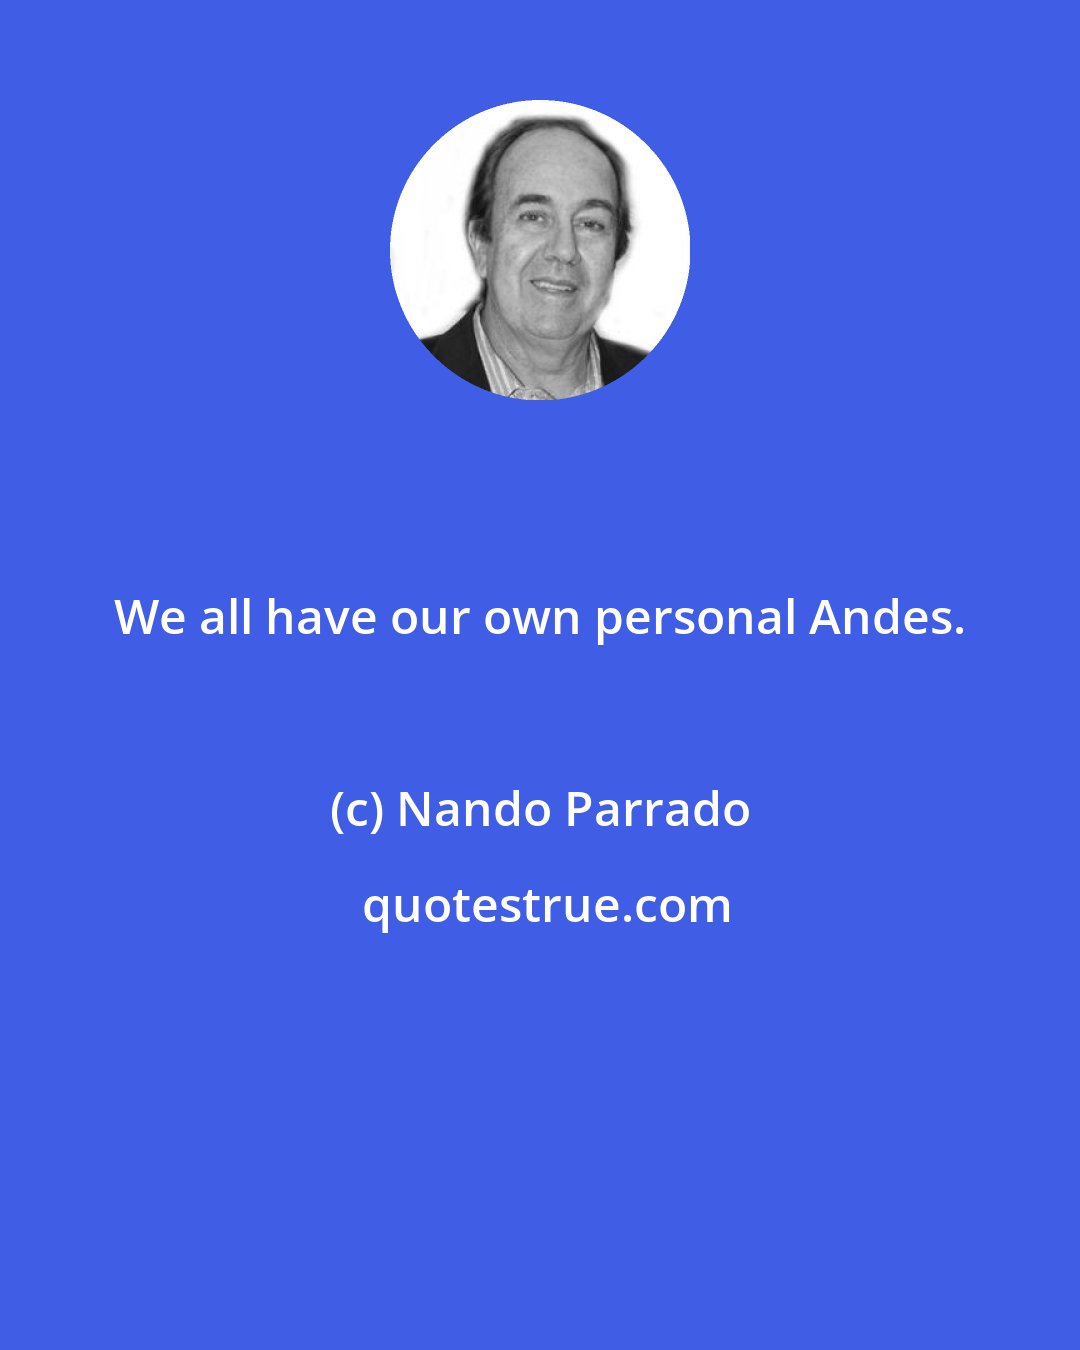 Nando Parrado: We all have our own personal Andes.